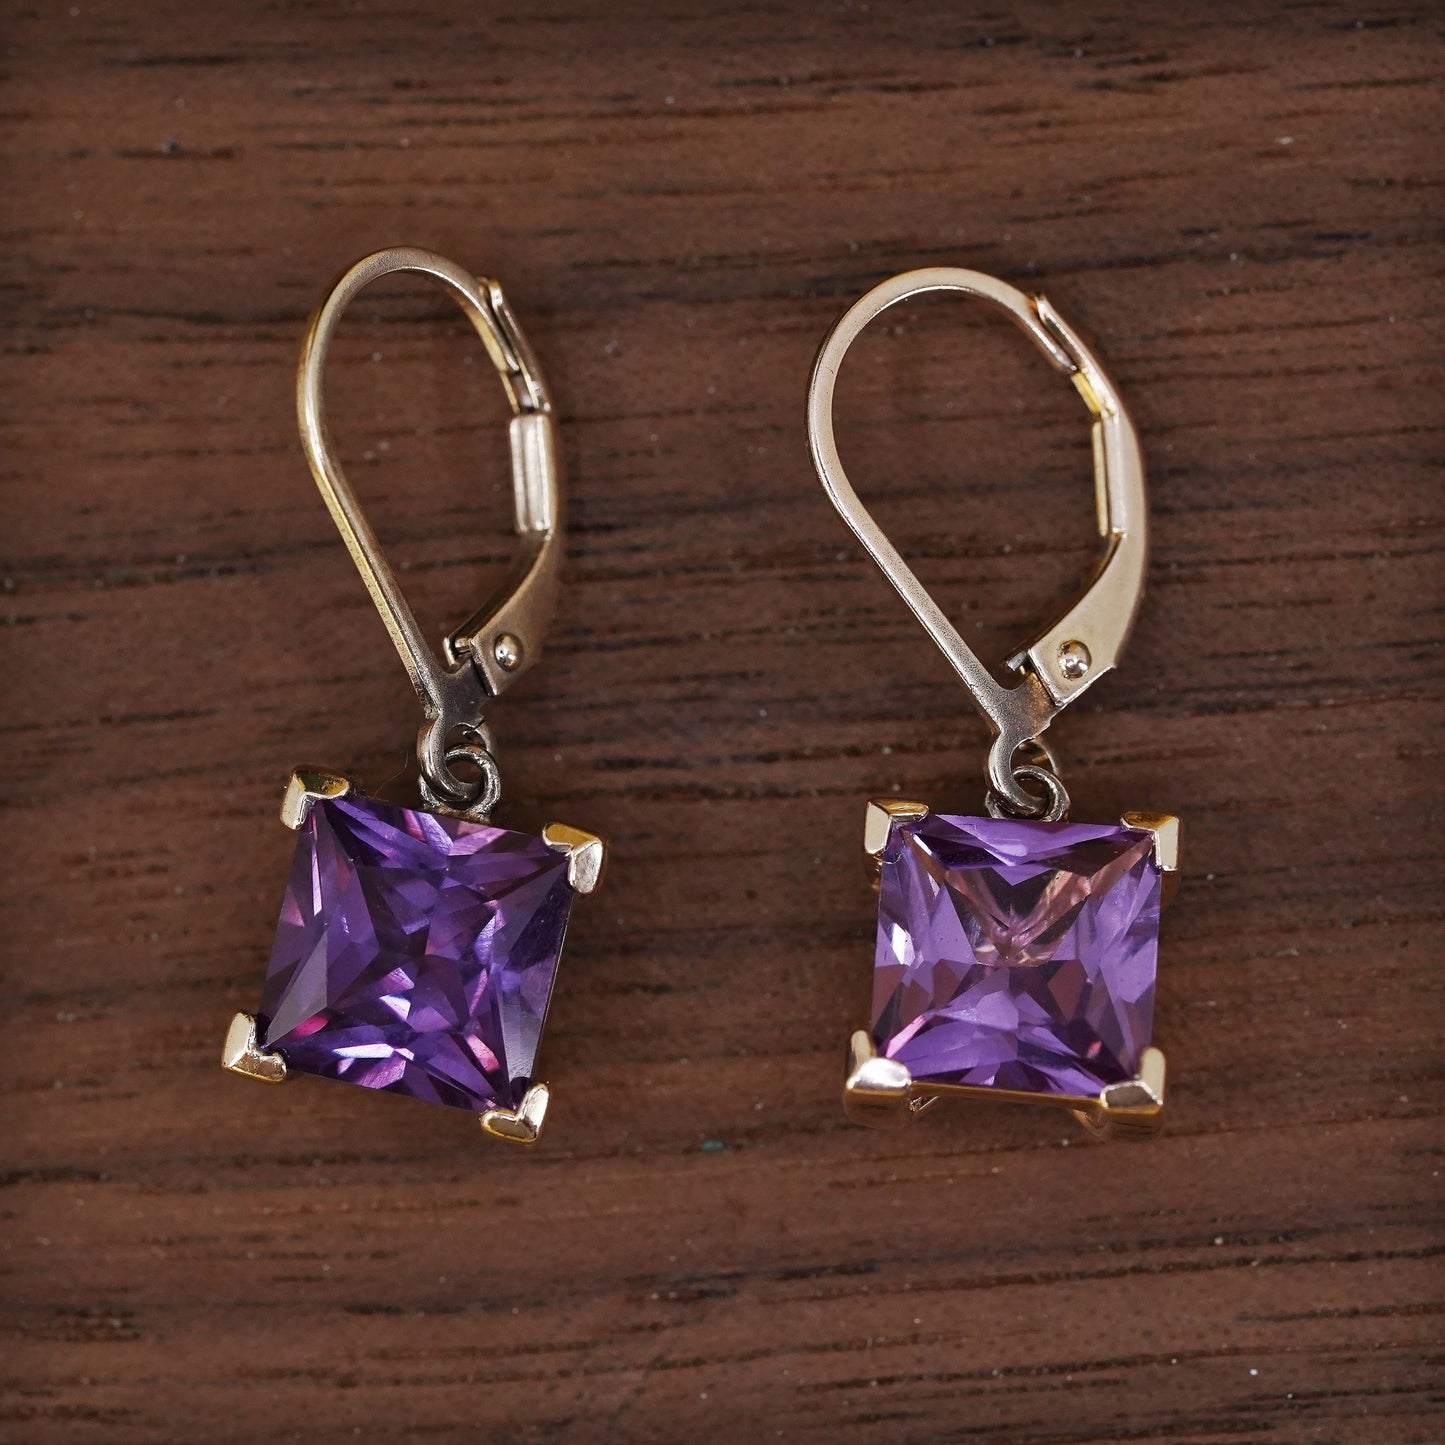 Vintage vermeil gold over Sterling 925 silver handmade earrings with square amethyst